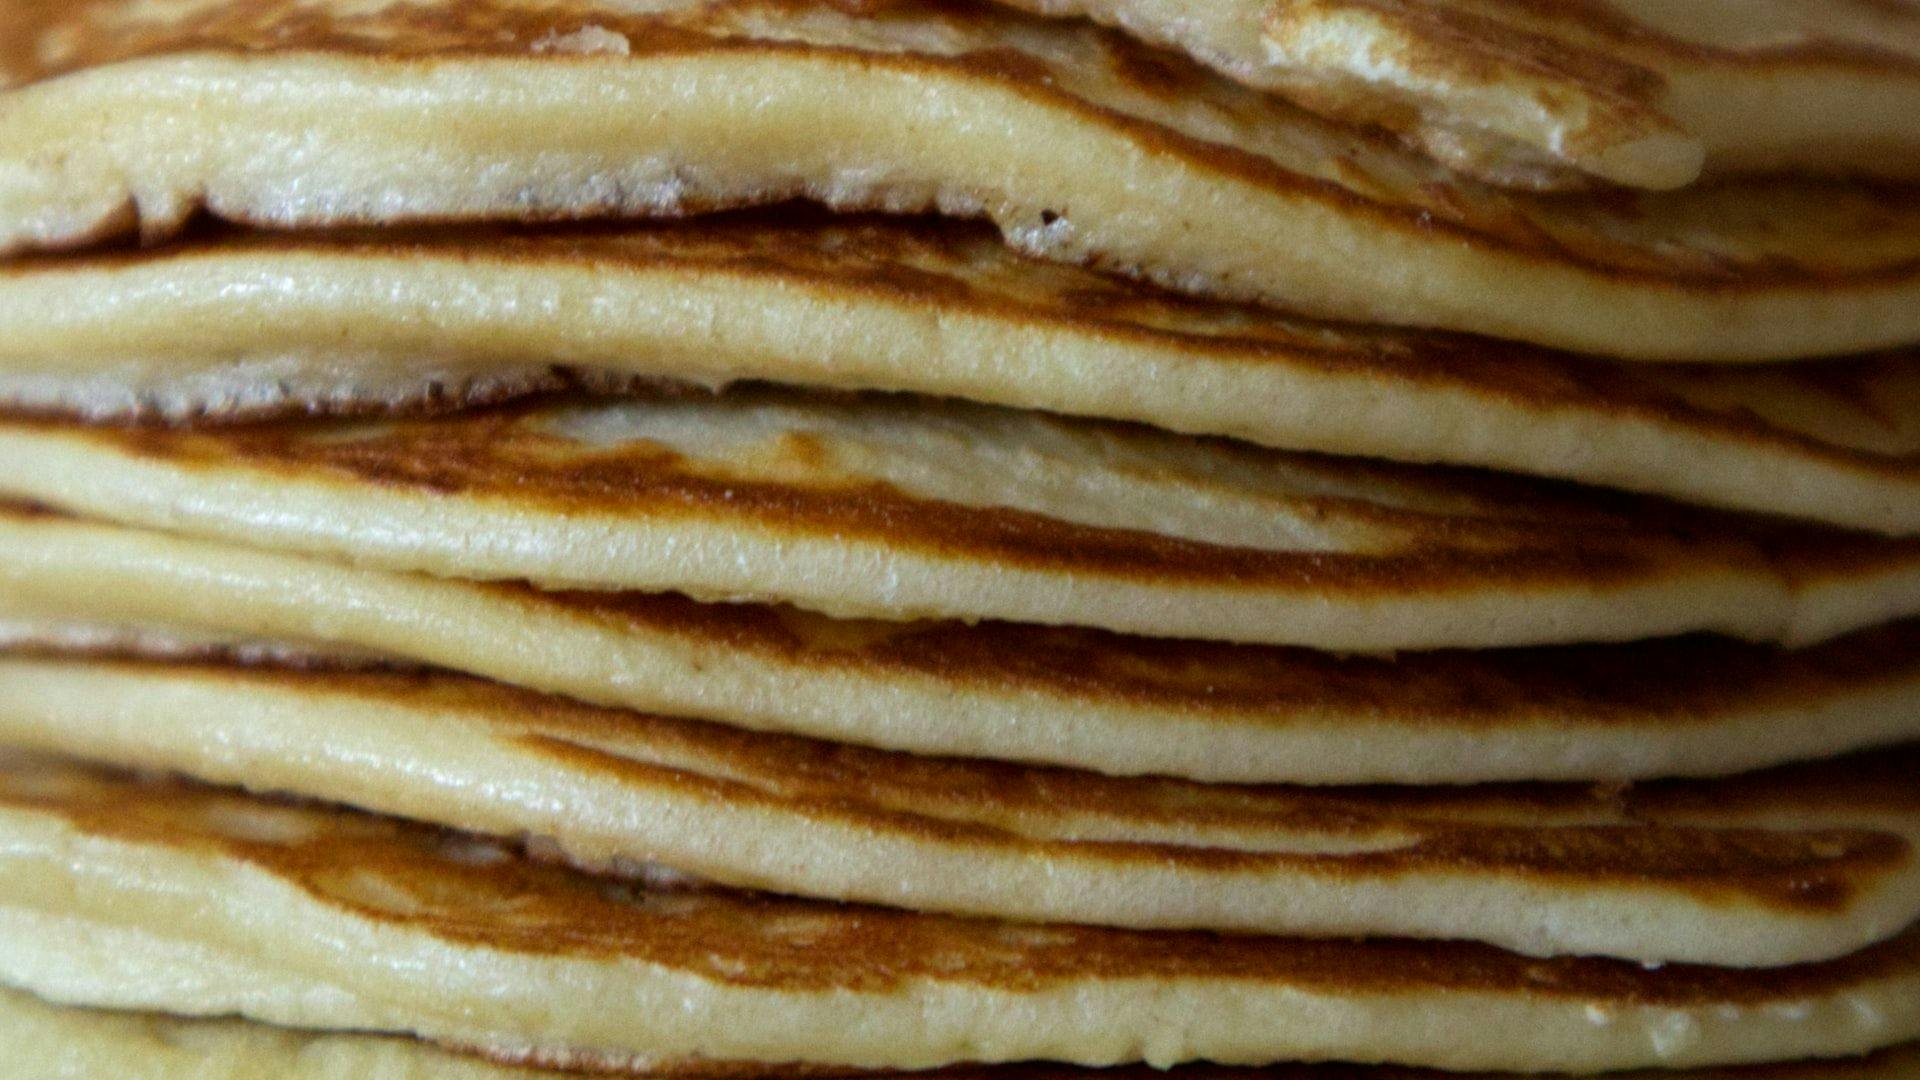 Listeria monocytogenes for breakfast: Cerelia Belgium brand pancakes may be contaminated with a dangerous bacteria